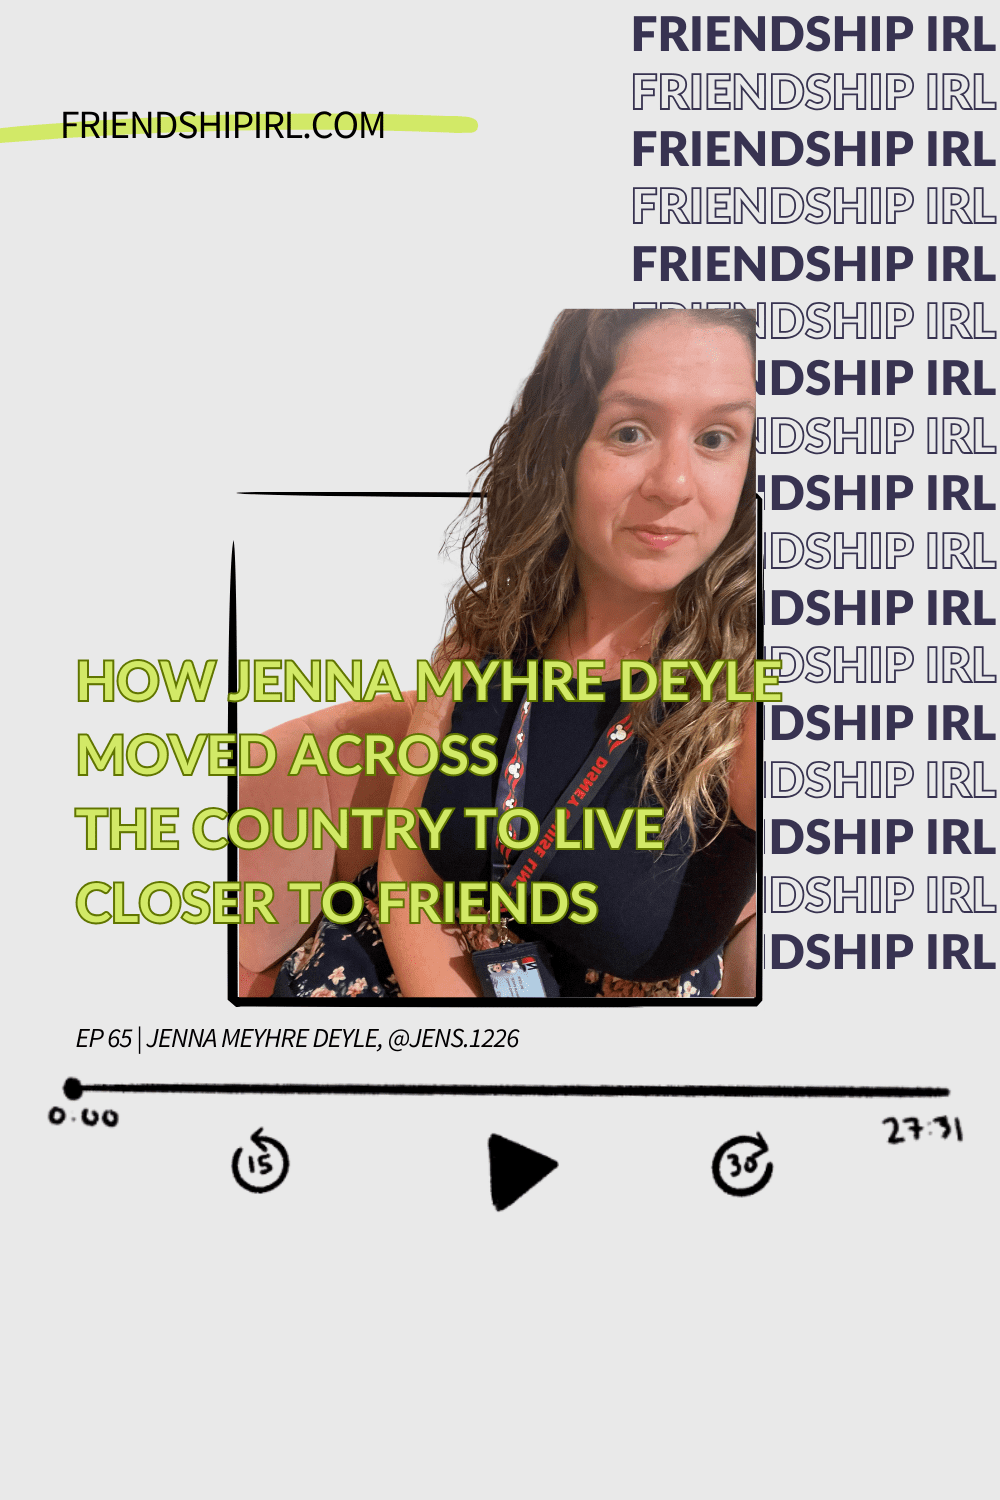 Friendship IRL Podcast - Episdoe 65 - How Jenna Myhre Deyle Moved Across the Country to Live Closer to Friends